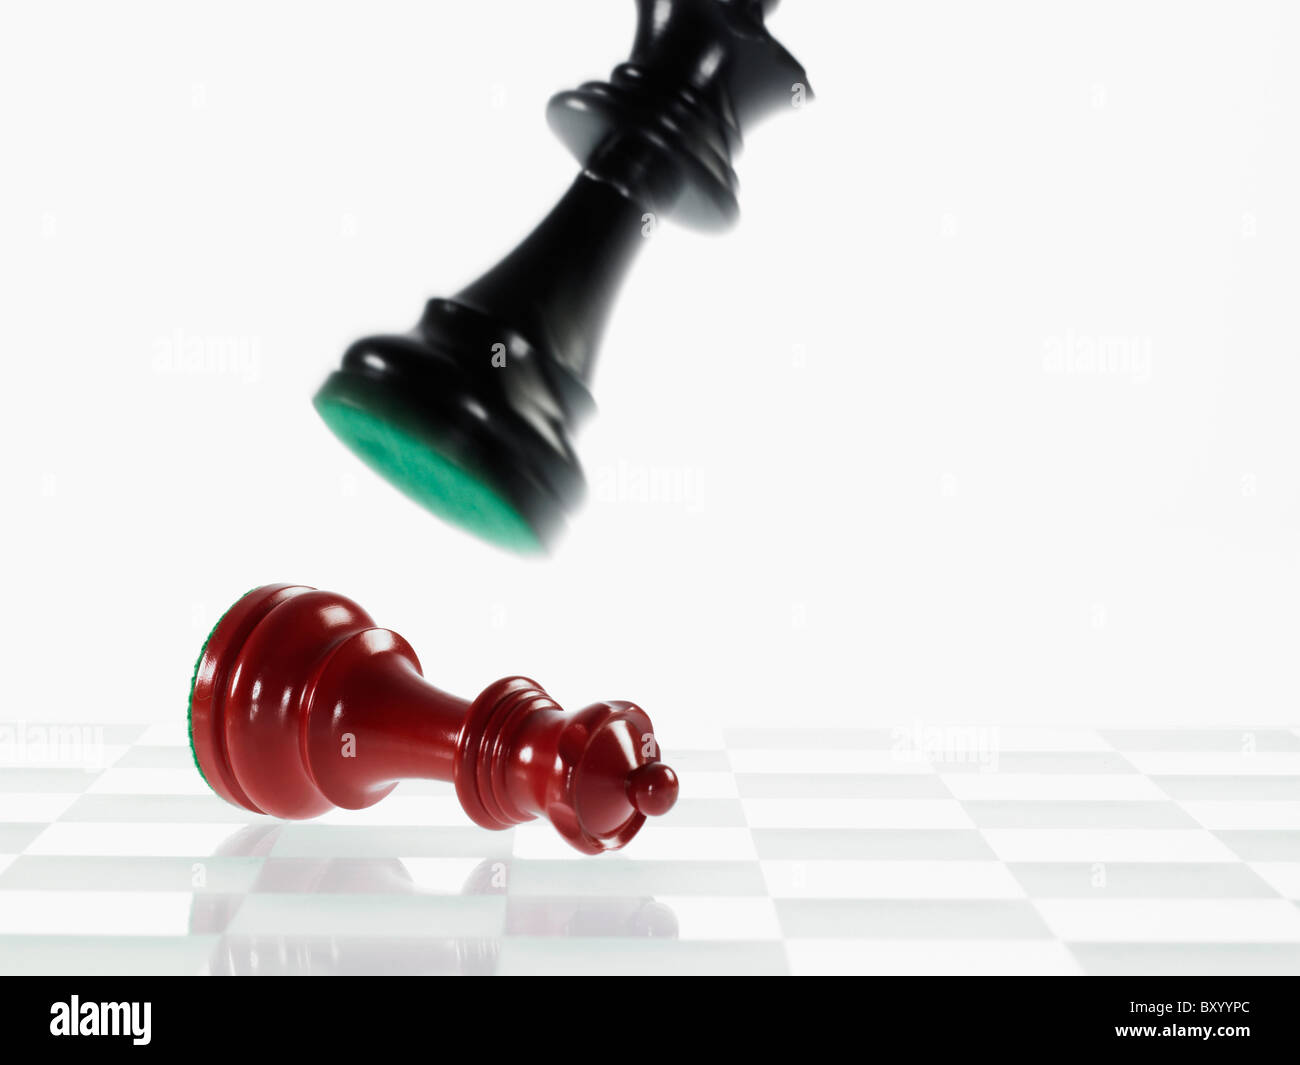 Rival queen chess pieces fighting Stock Photo